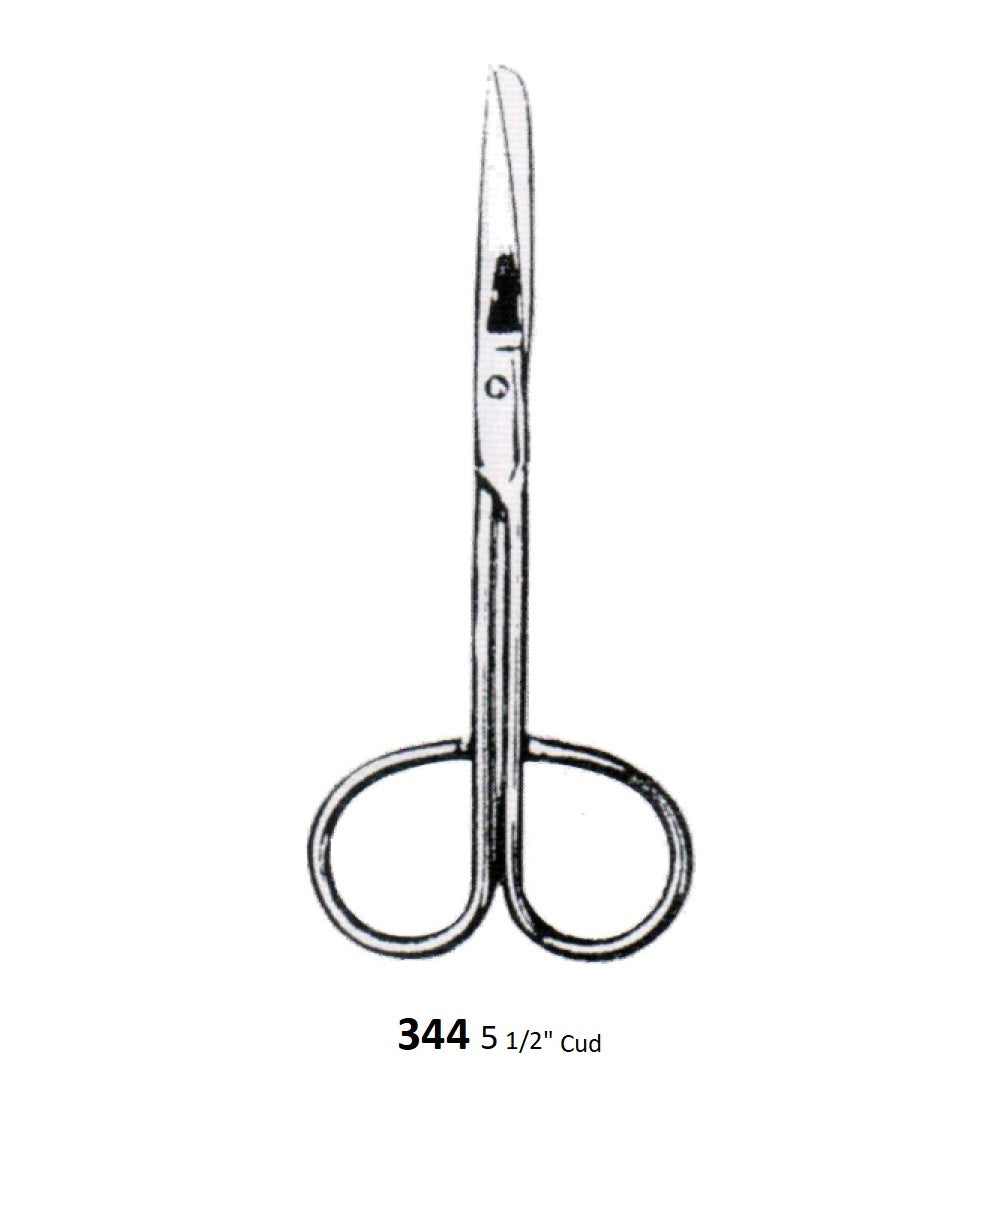 OPERATING SCISSORS CURVED,WIRE-FORM, C.P 344